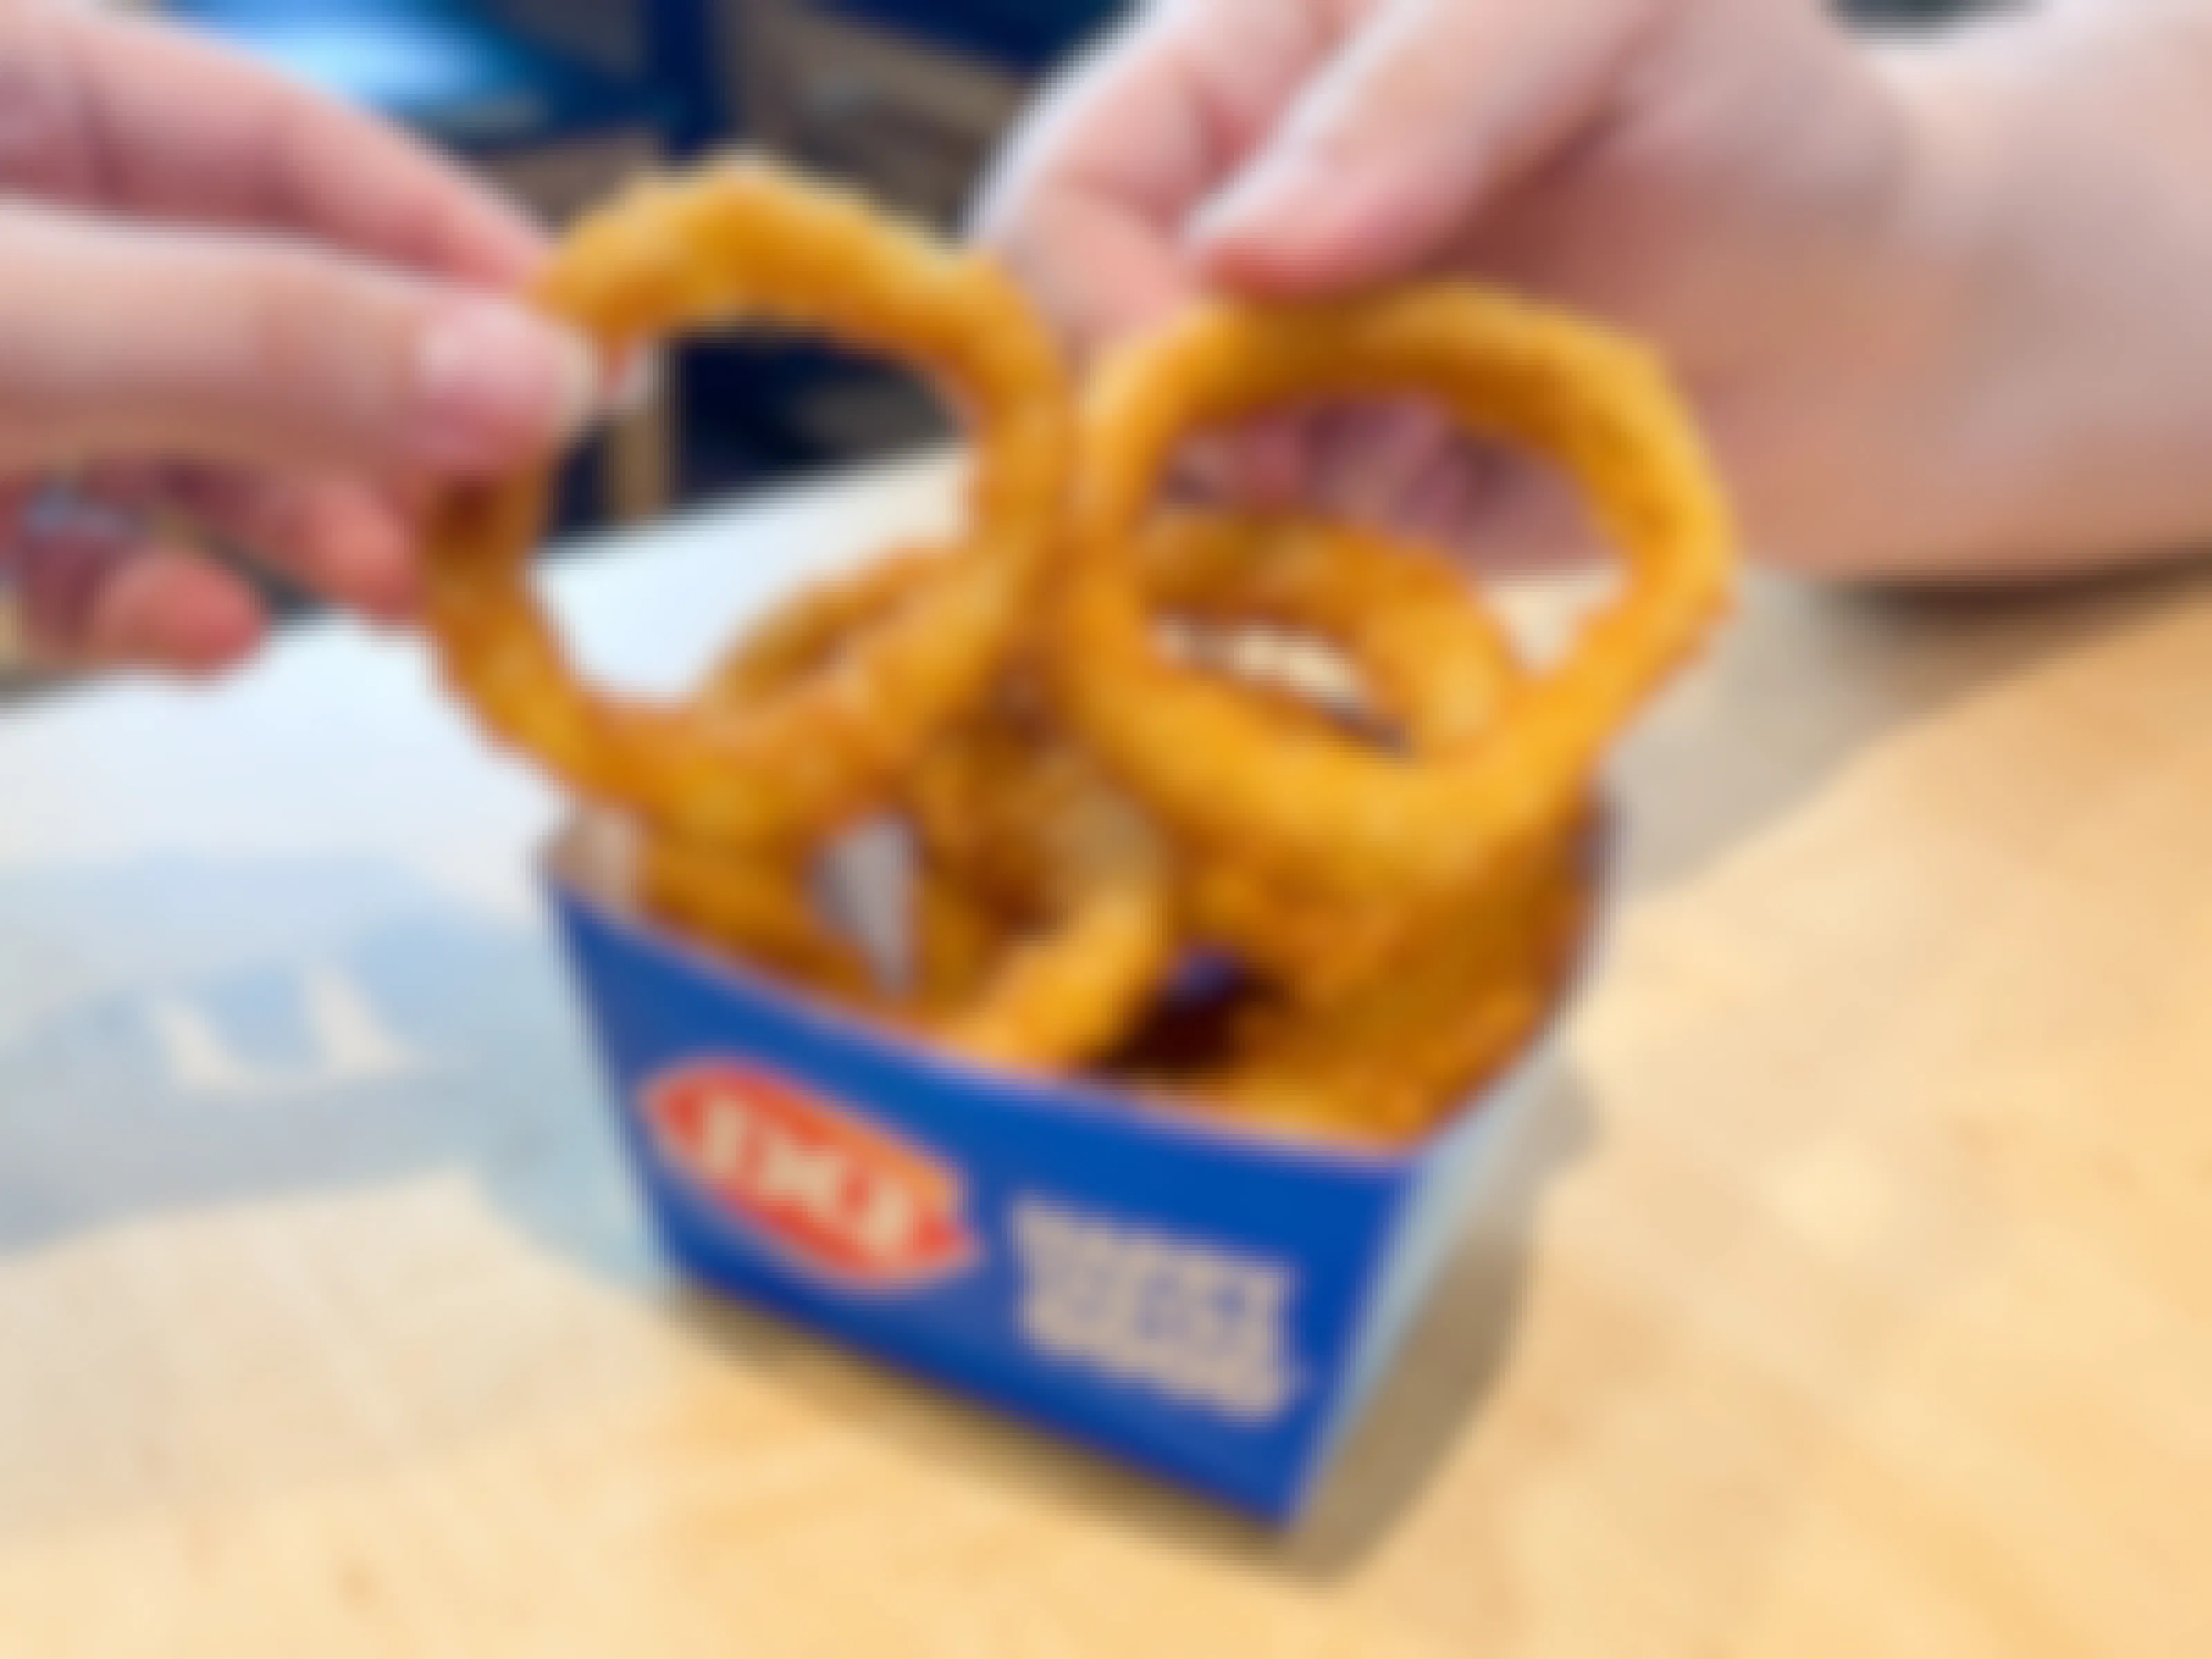 Two people's hands reaching in to each take an onion ring from a box of Dairy Queen onion rings sitting on a table inside Dairy Queen.